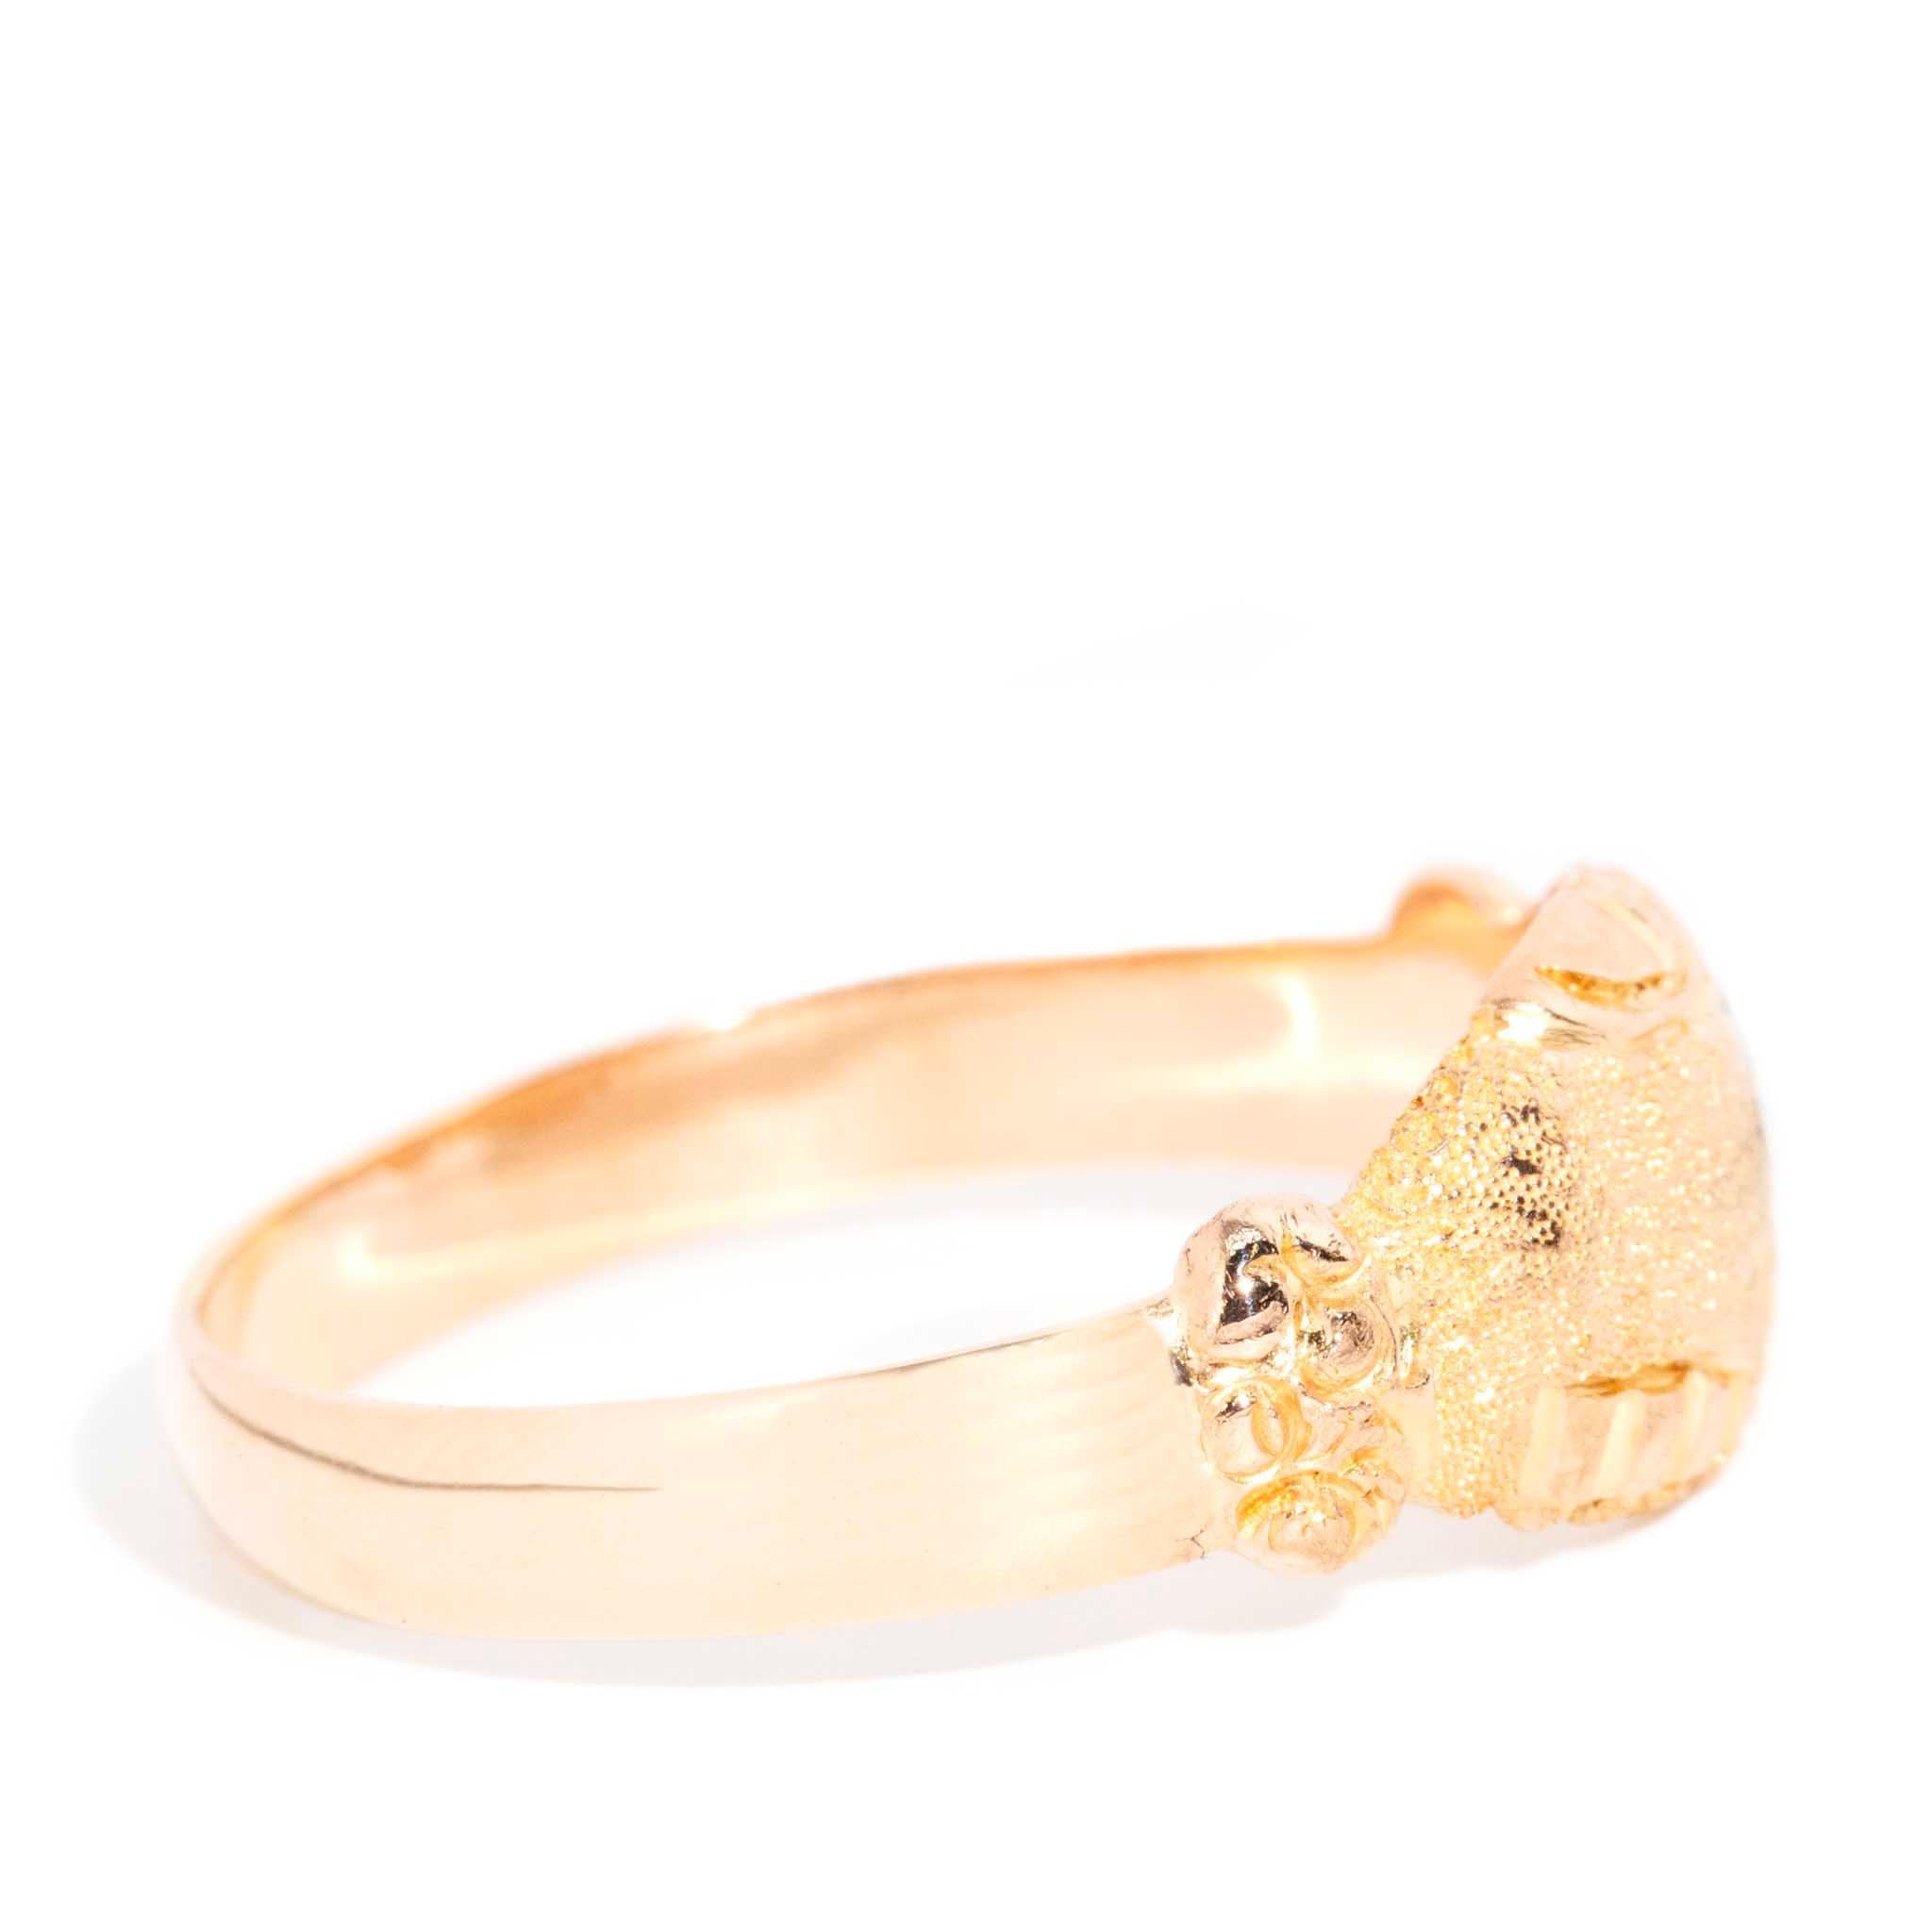 Vintage Circa 1930s Textured Fede Loyalty Ring 15 Carat Yellow Gold For Sale 1